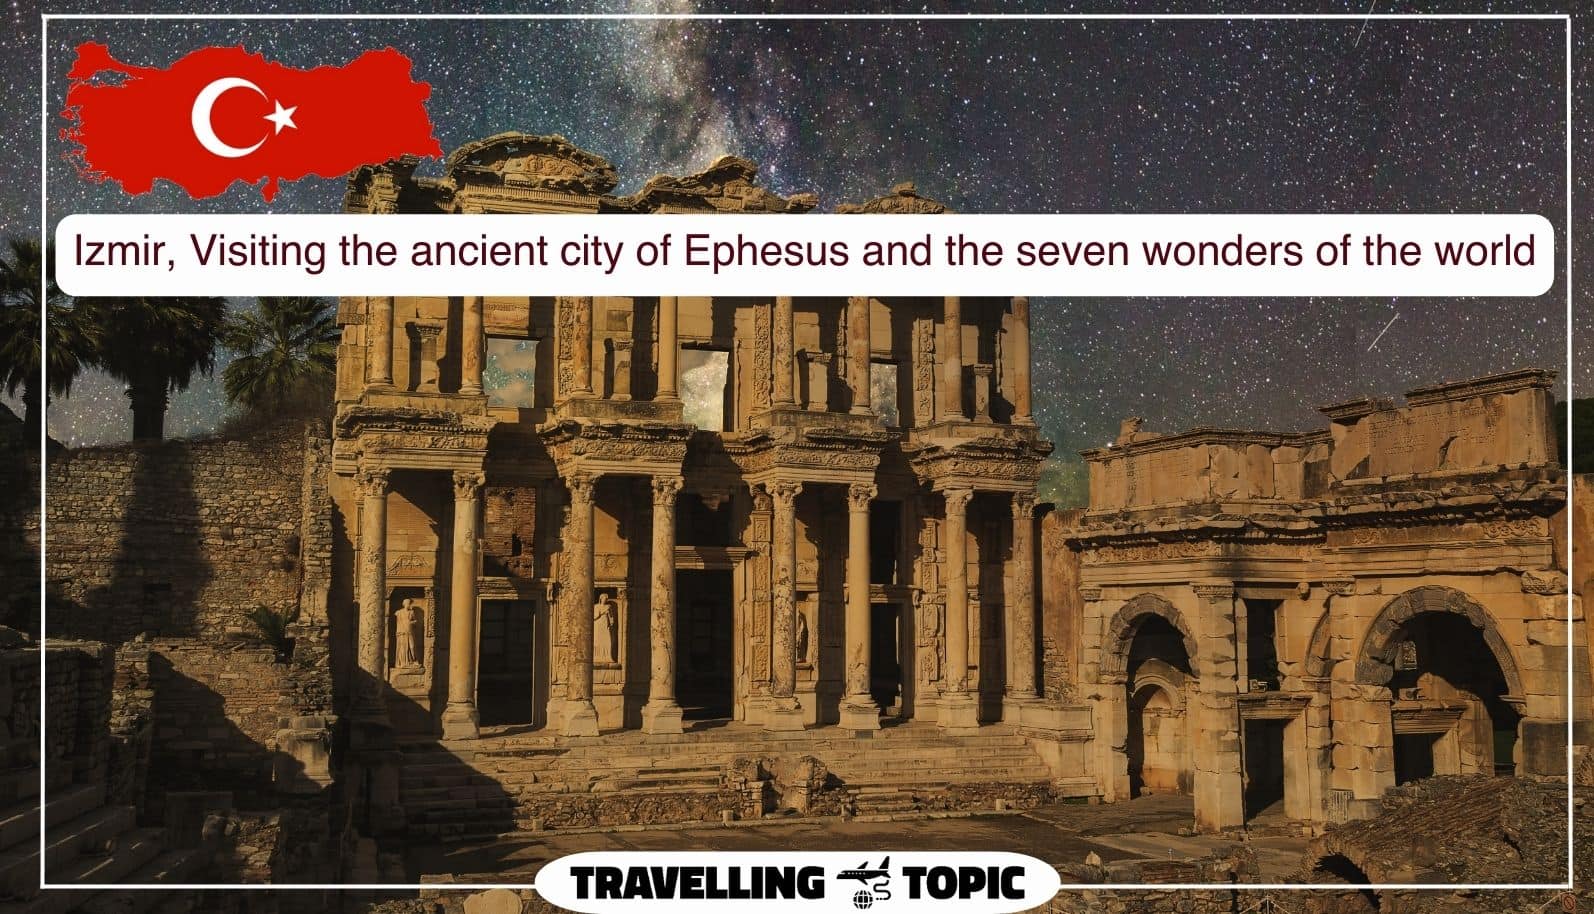 Izmir, Visiting the ancient city of Ephesus and the seven wonders of the world